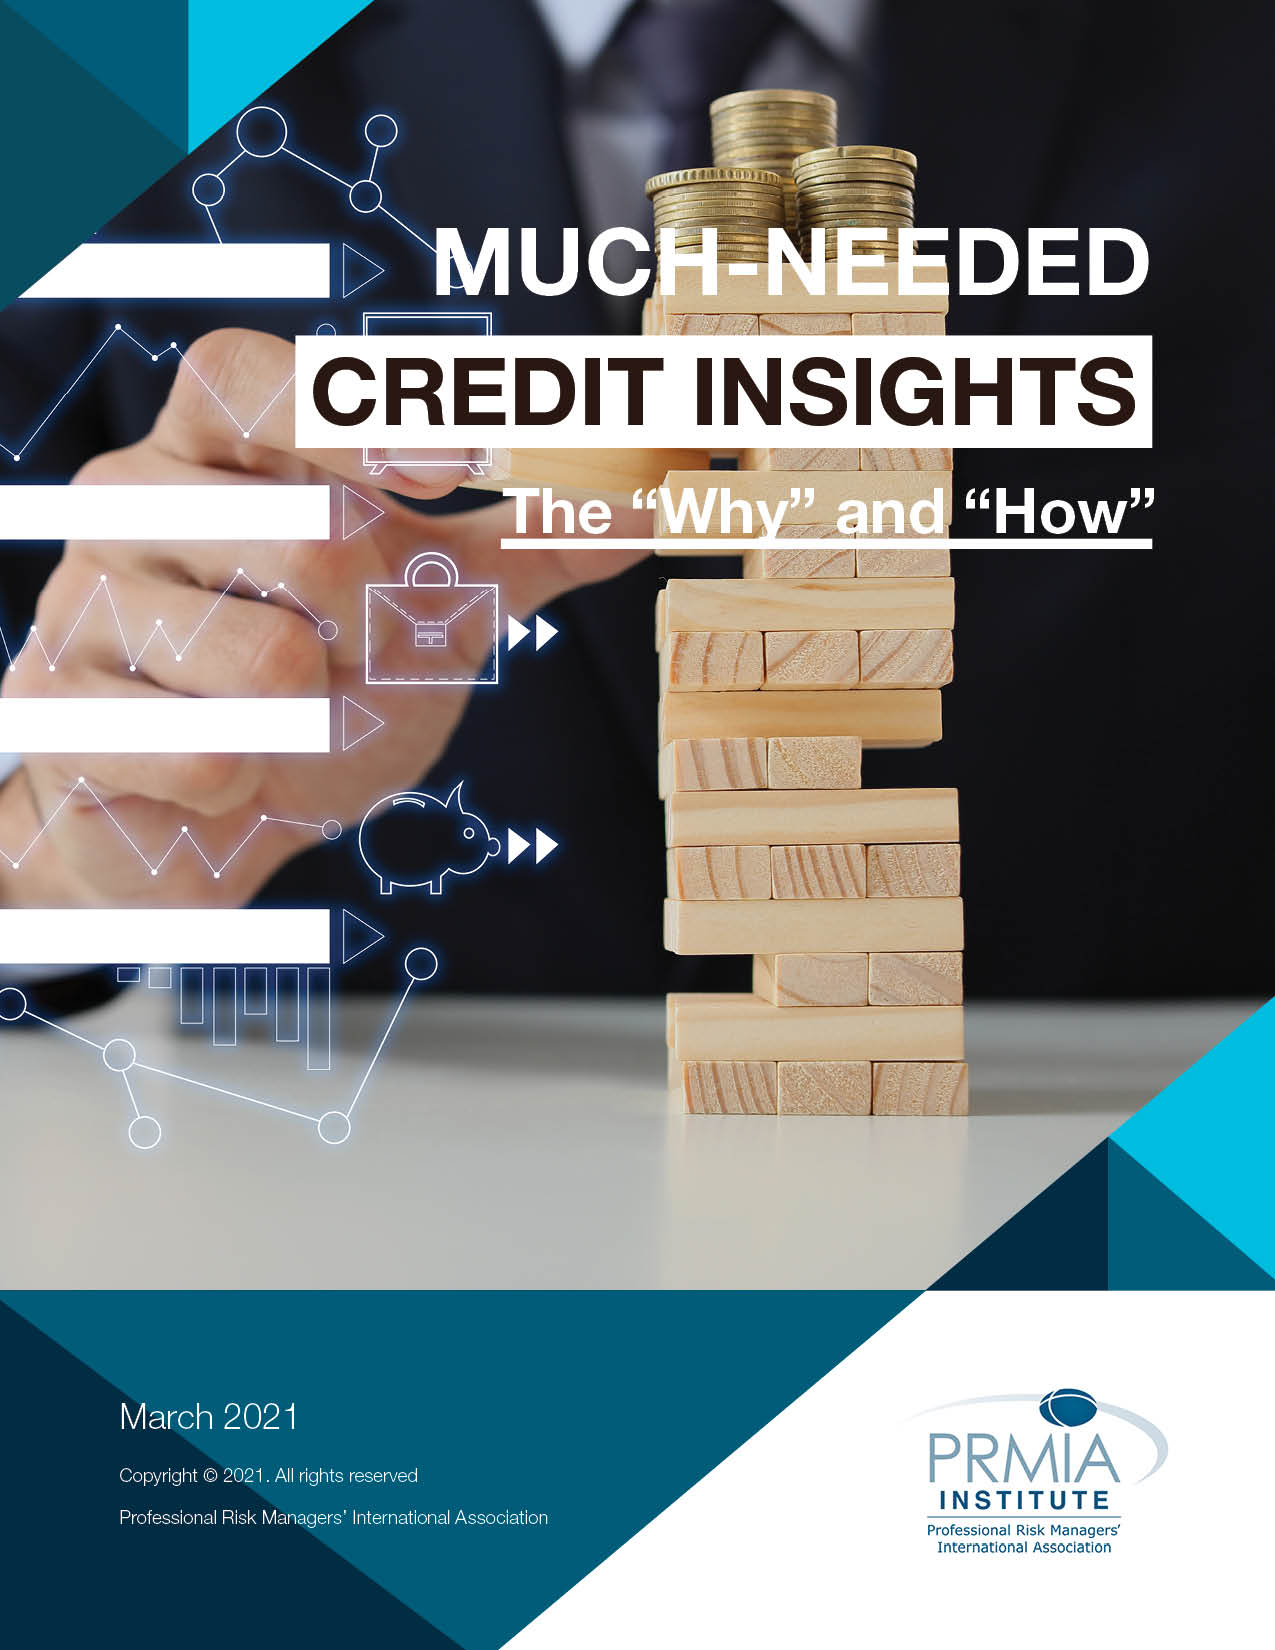 Paper: Much-Needed Credit Insights